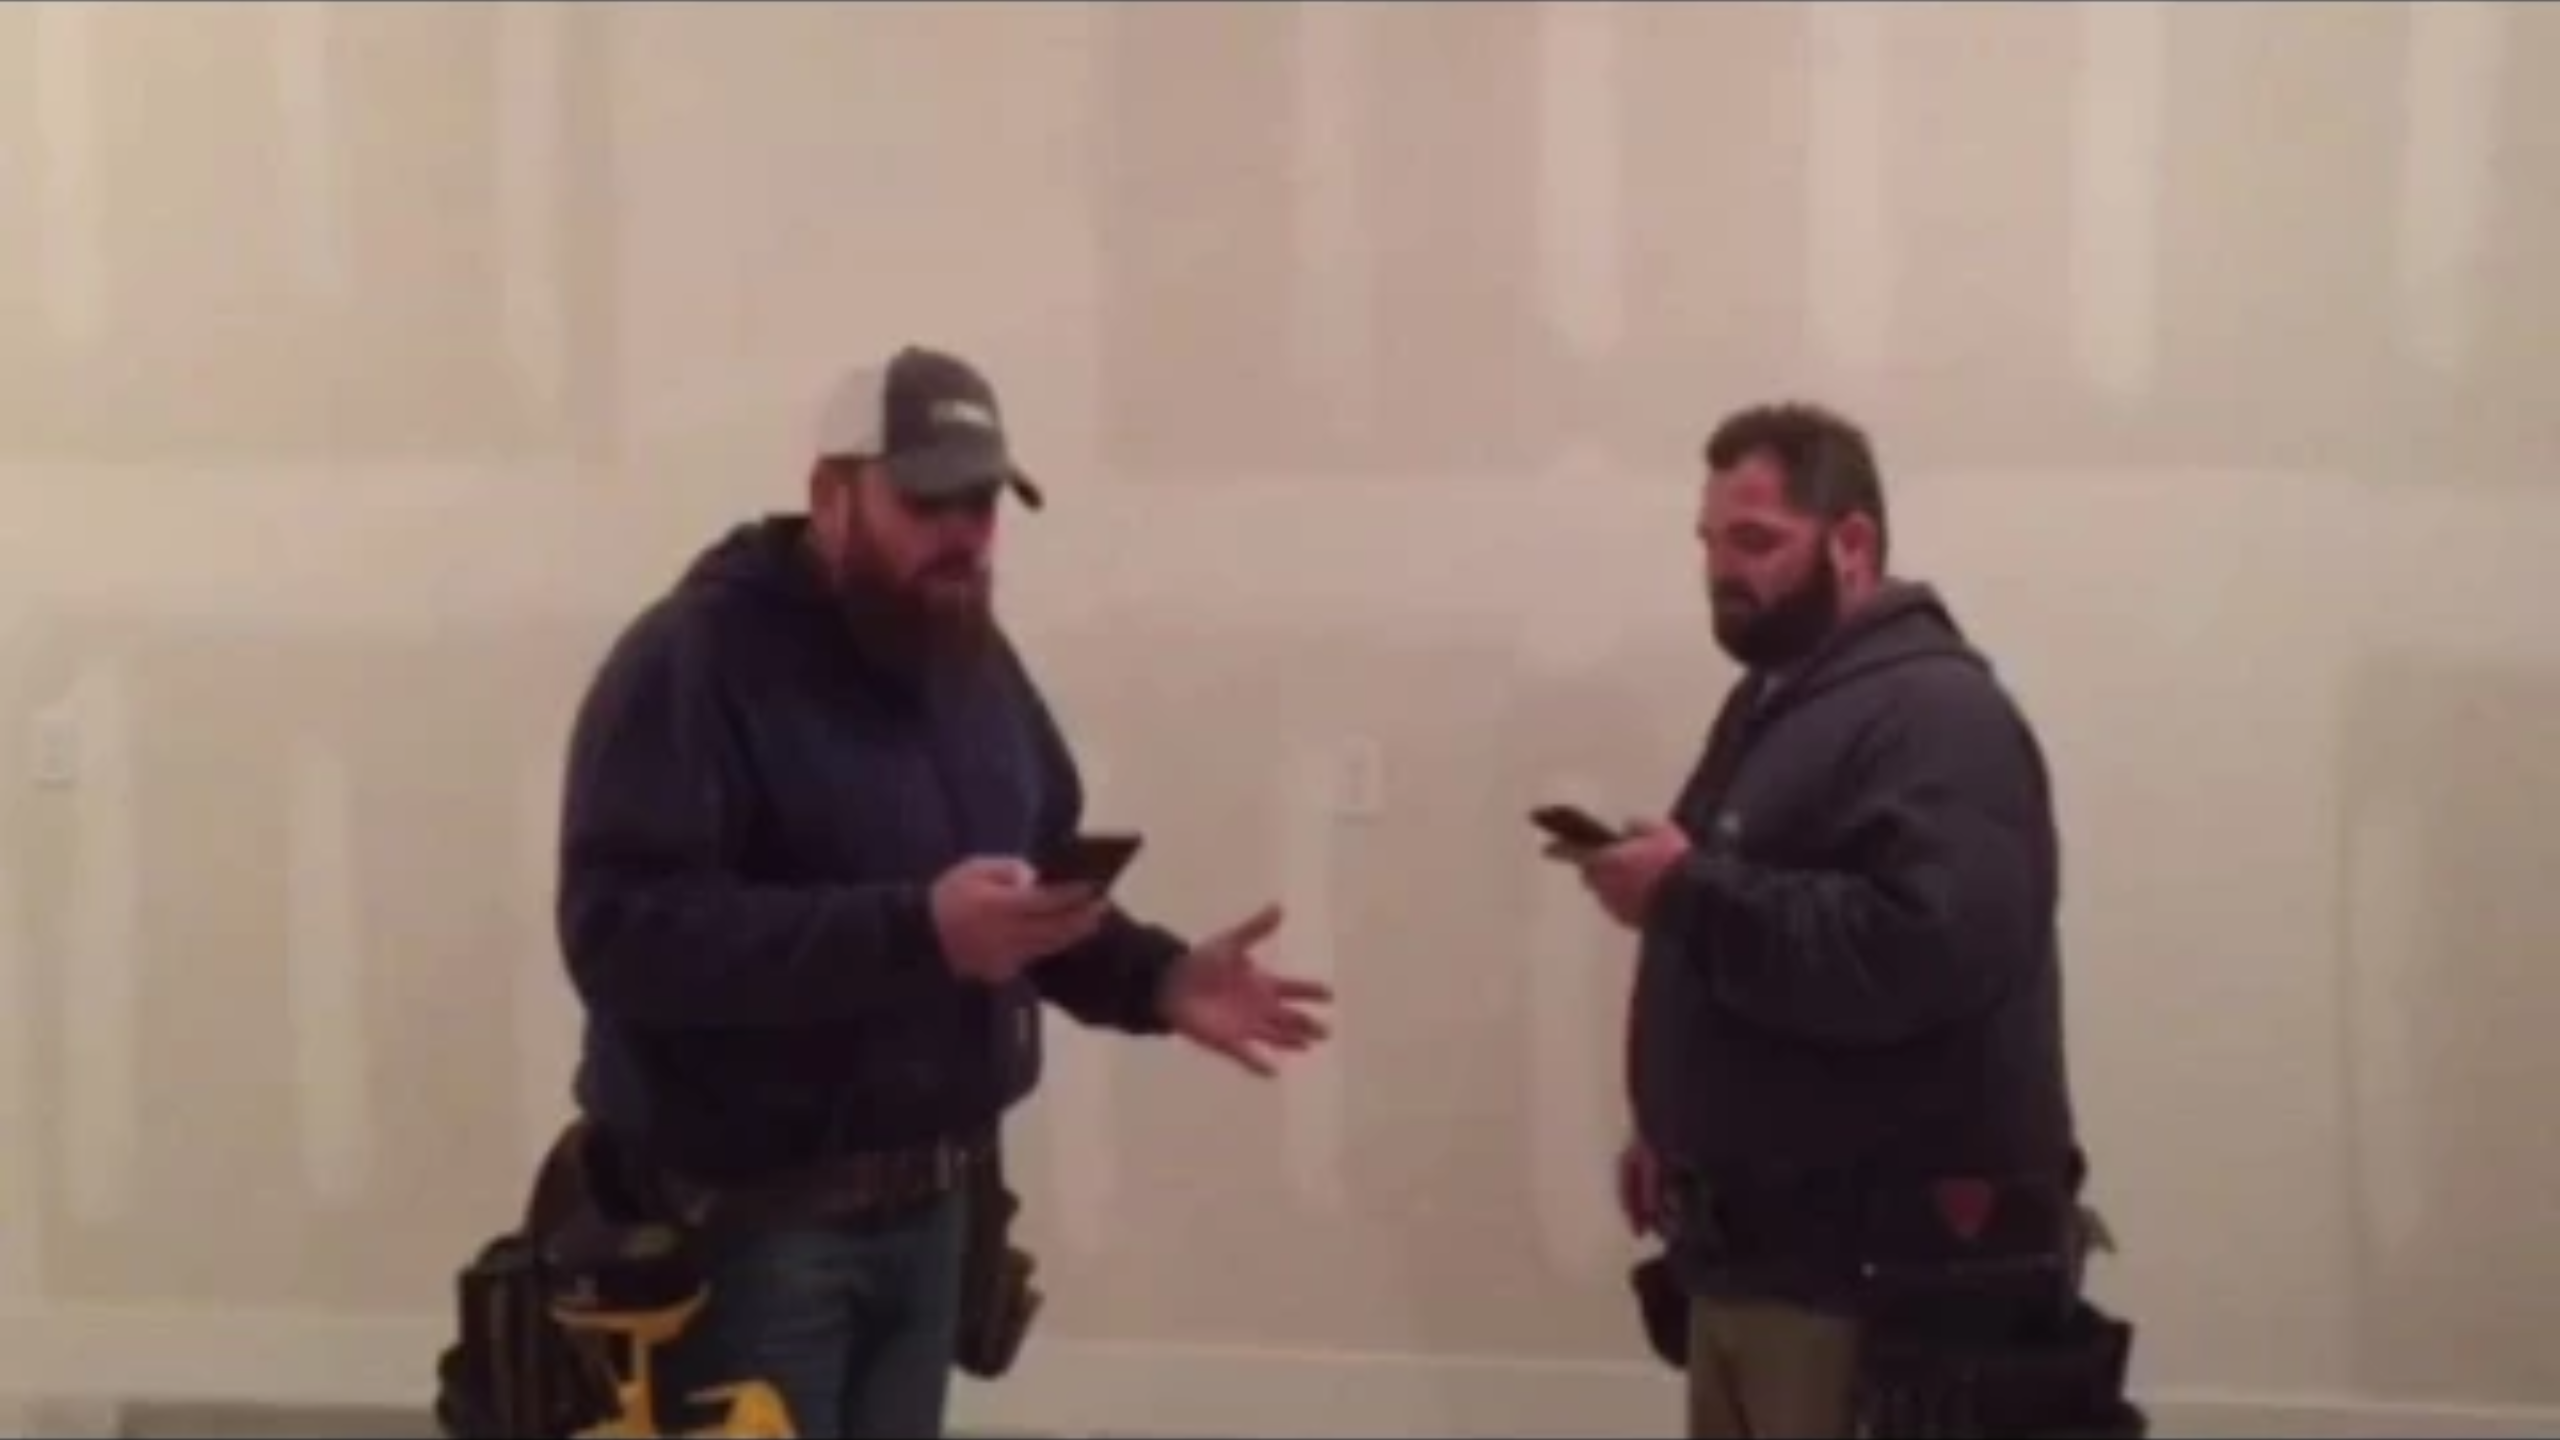 Contractors Singing “Mary Did You Know” Go Viral